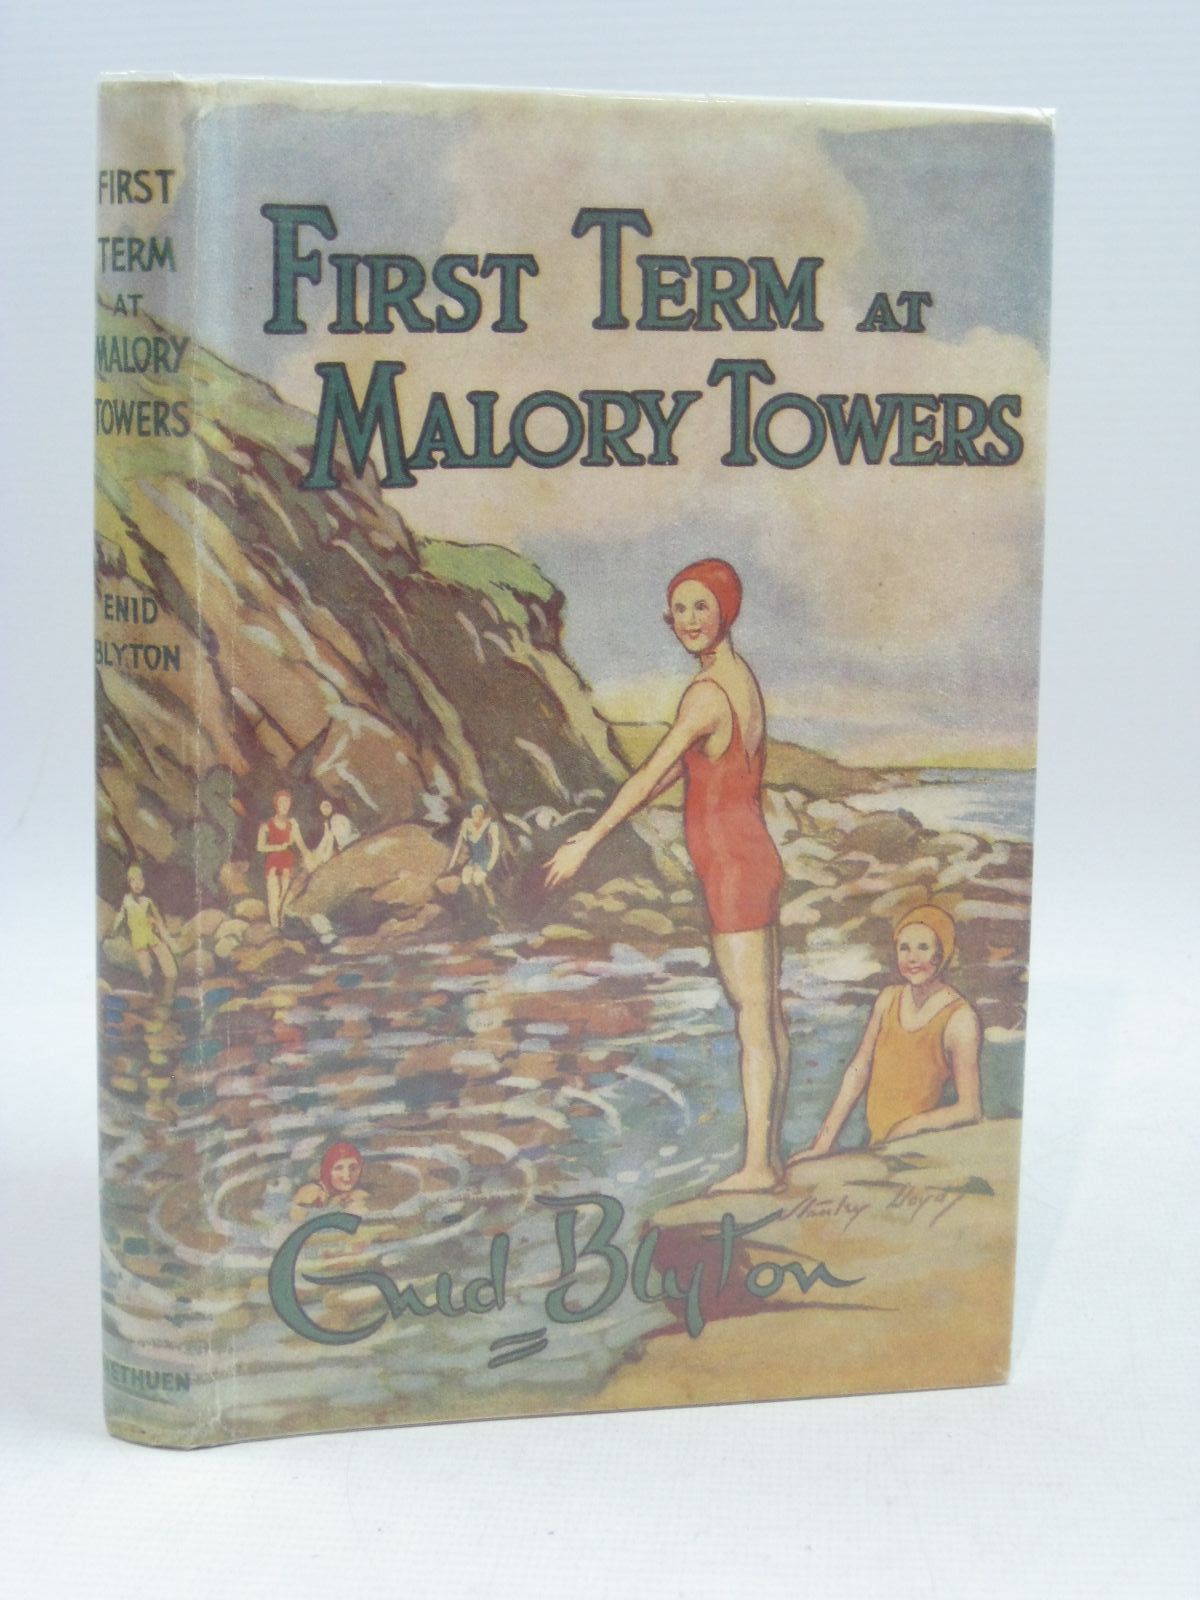 Cover of FIRST TERM AT MALORY TOWERS by Enid Blyton